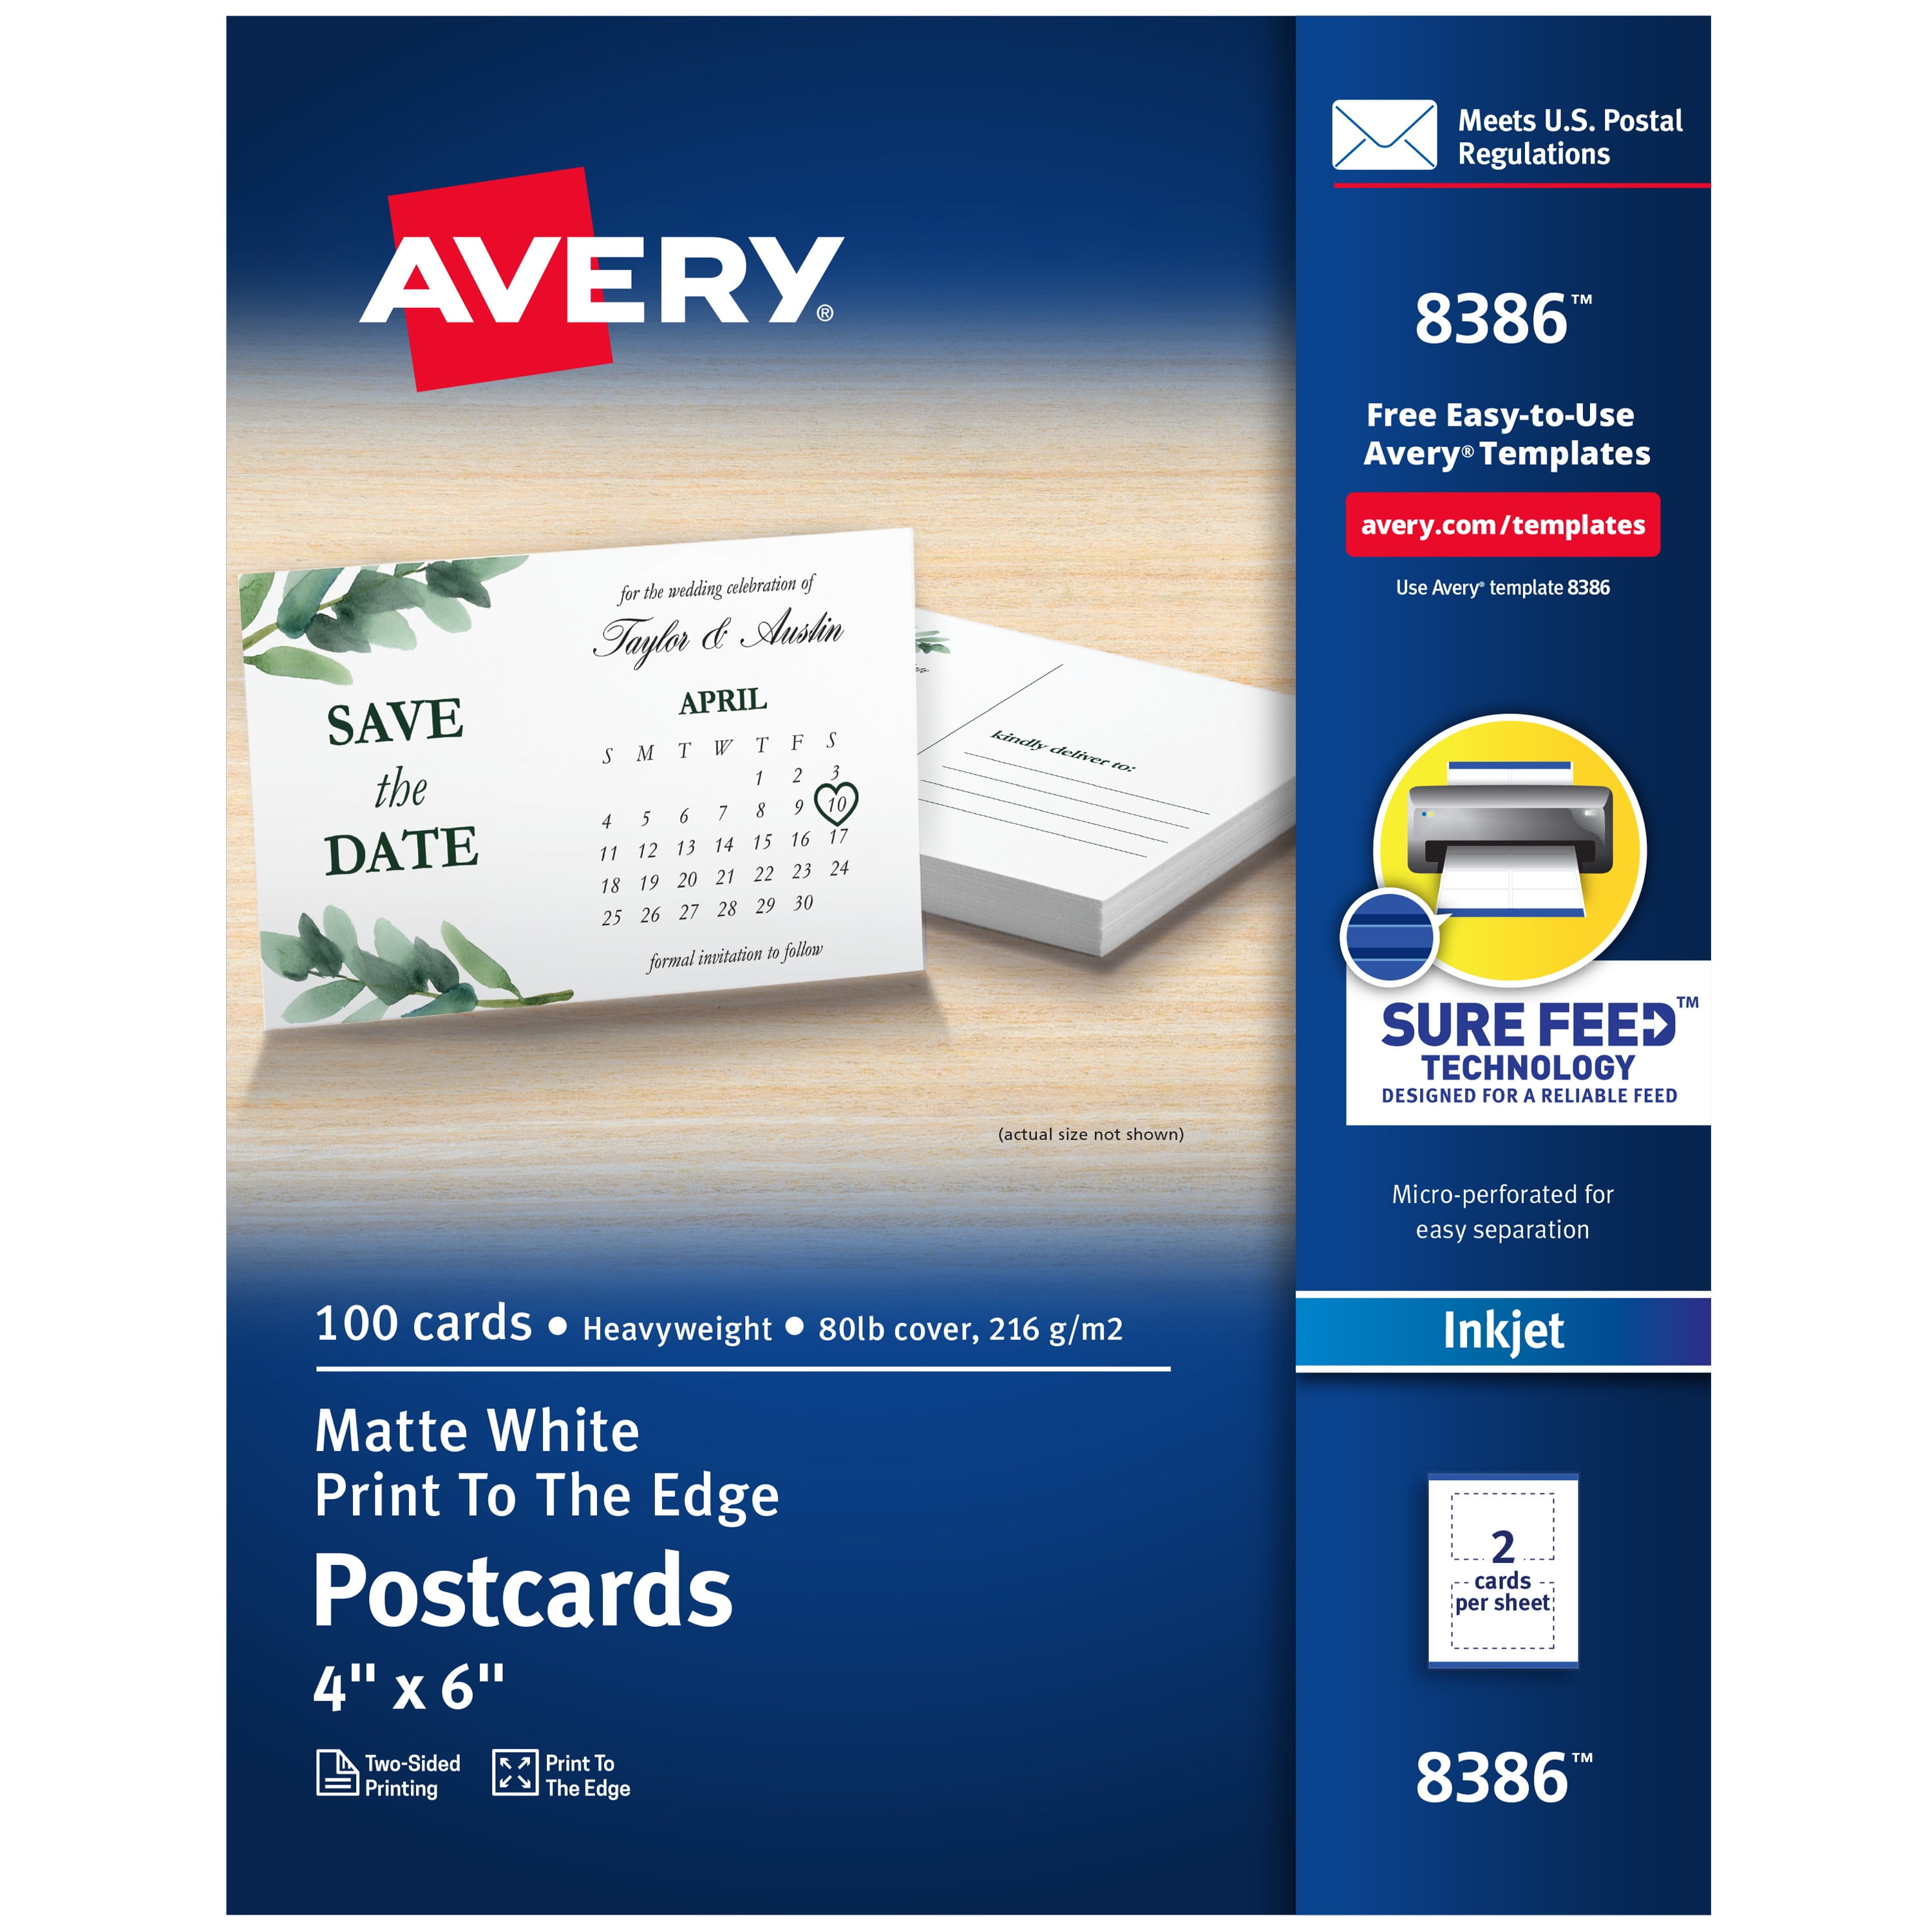 Avery Printable Greeting Cards, Quarter-Fold, 4.25 x 5.5, Matte White, 20  Blank Cards with Envelopes (3266) 